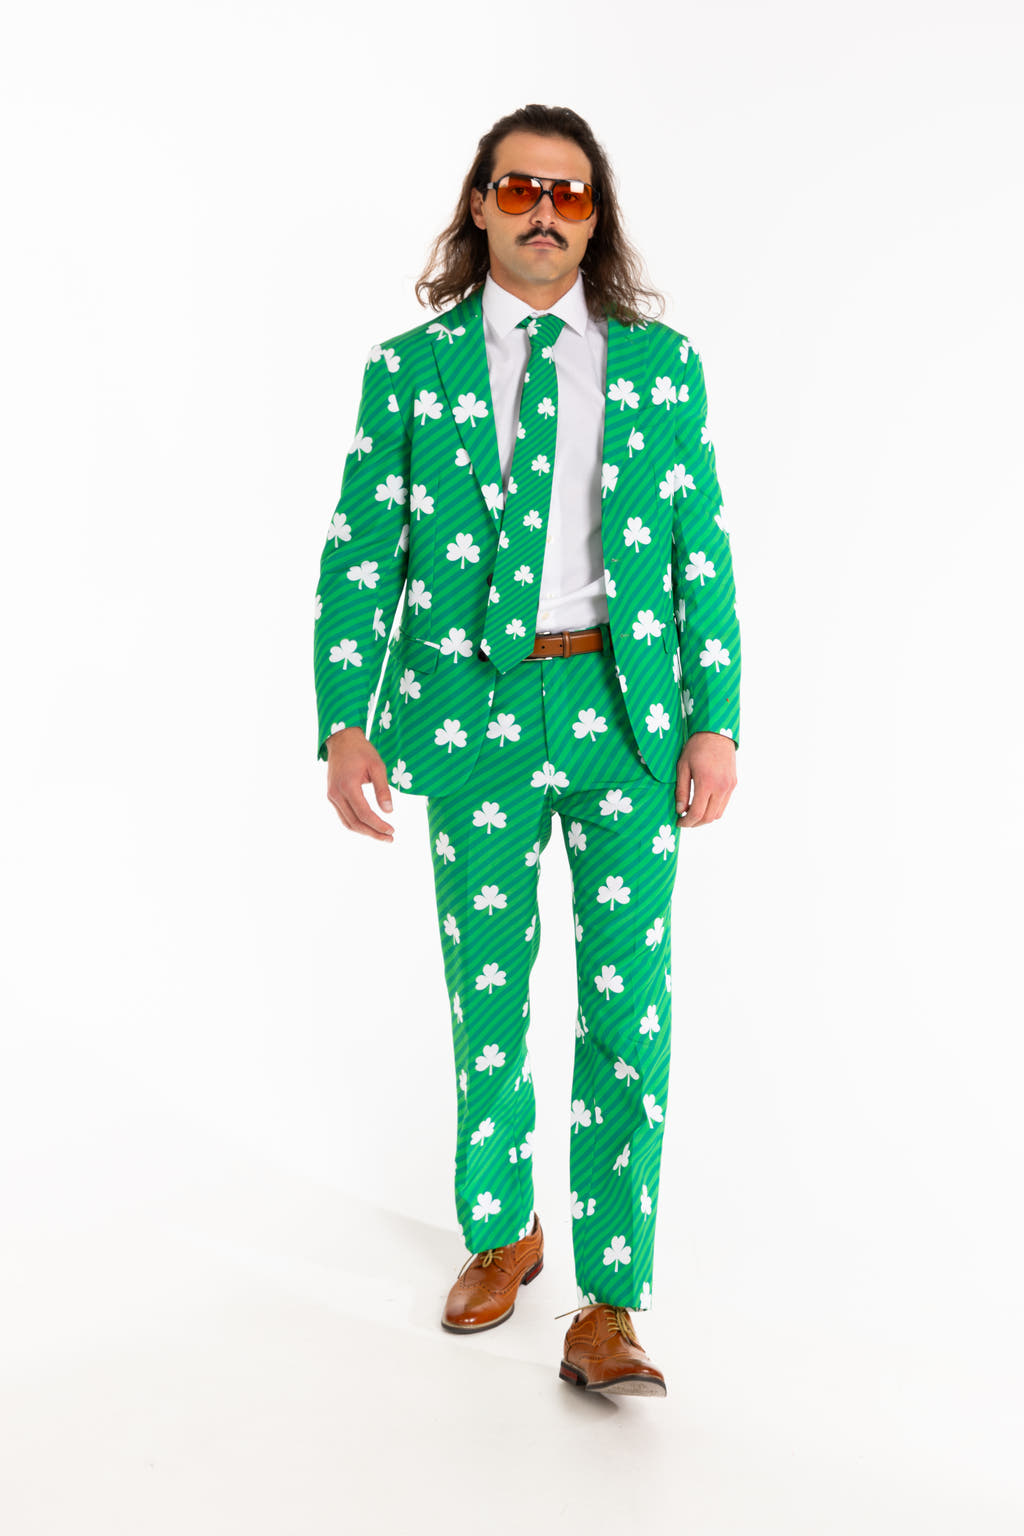 Green and white clovers suit